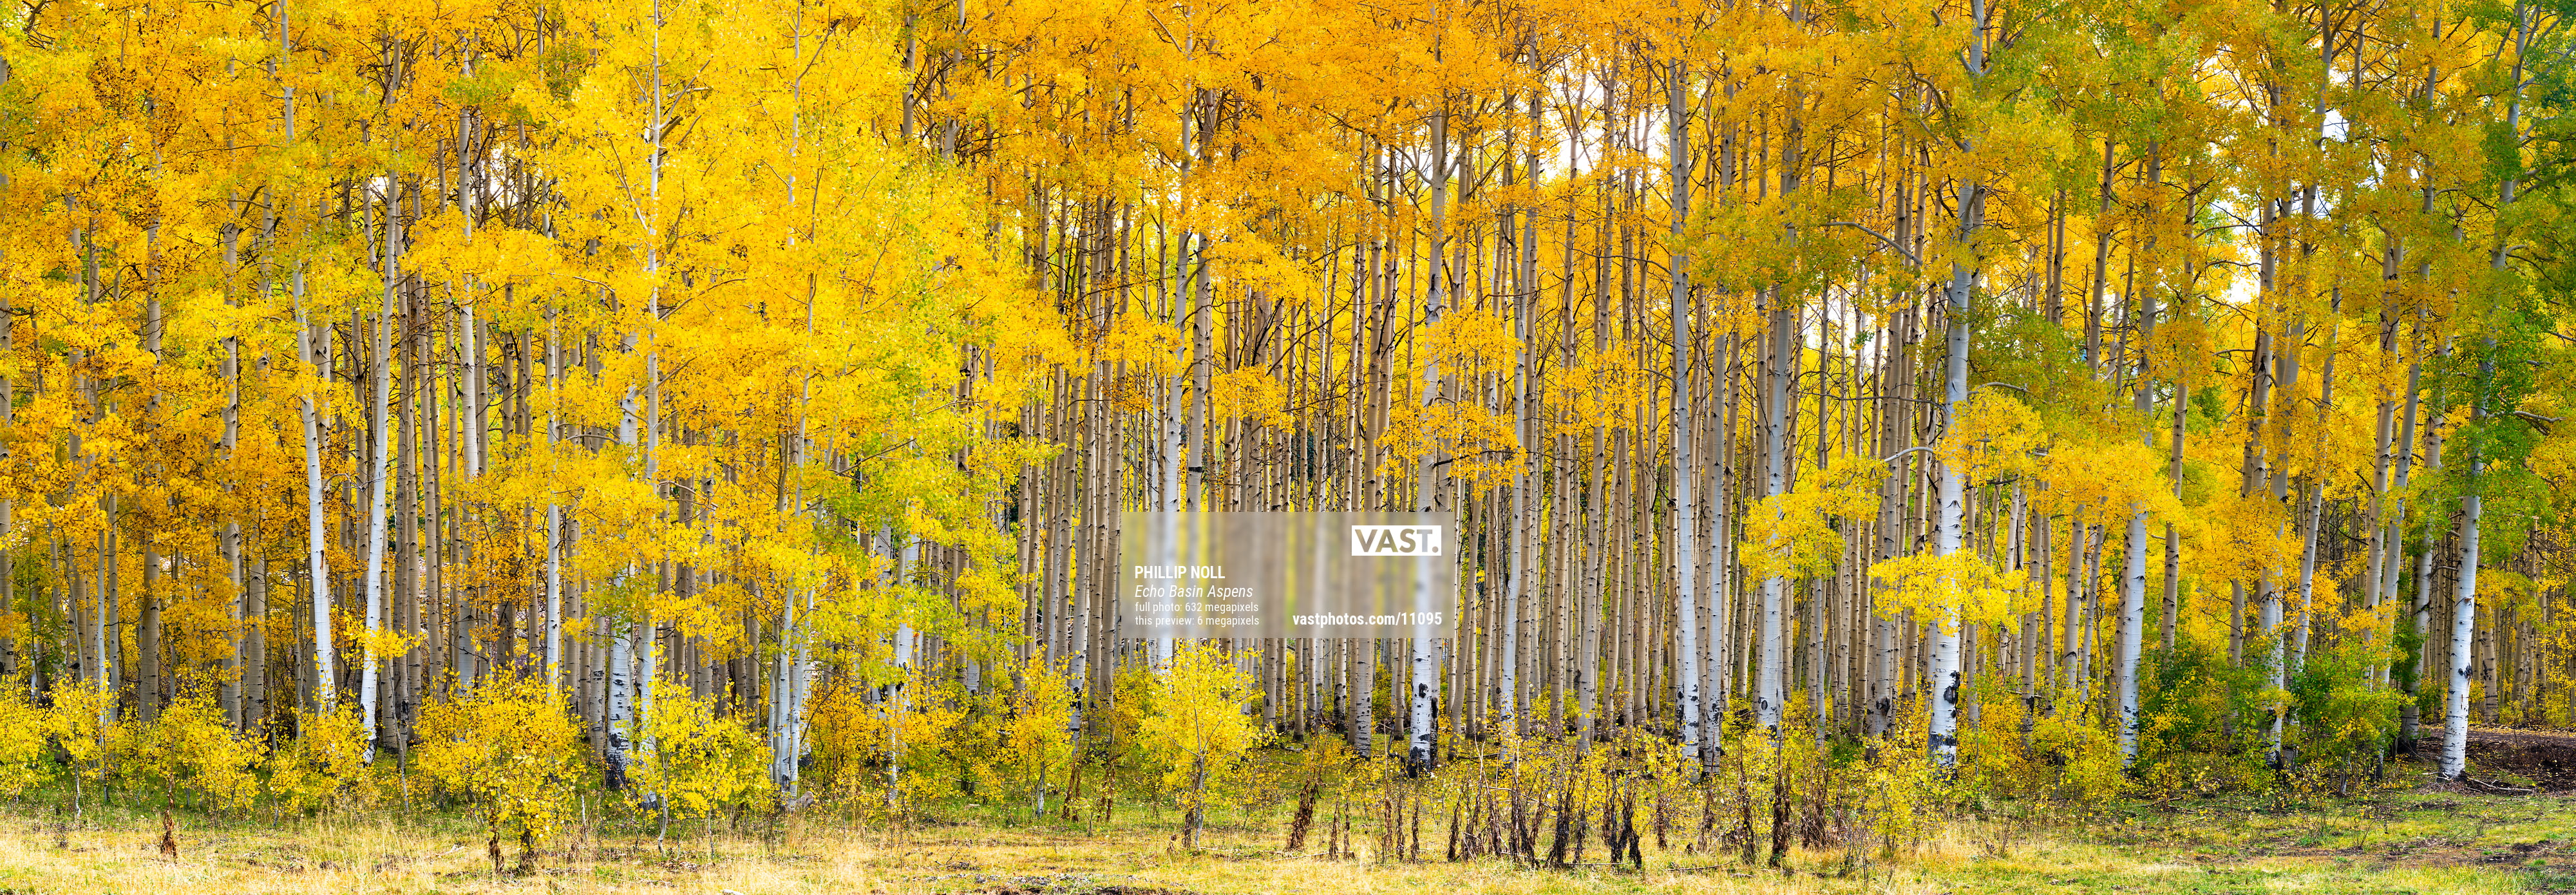 Photos of aspen trees for wallpapers vast